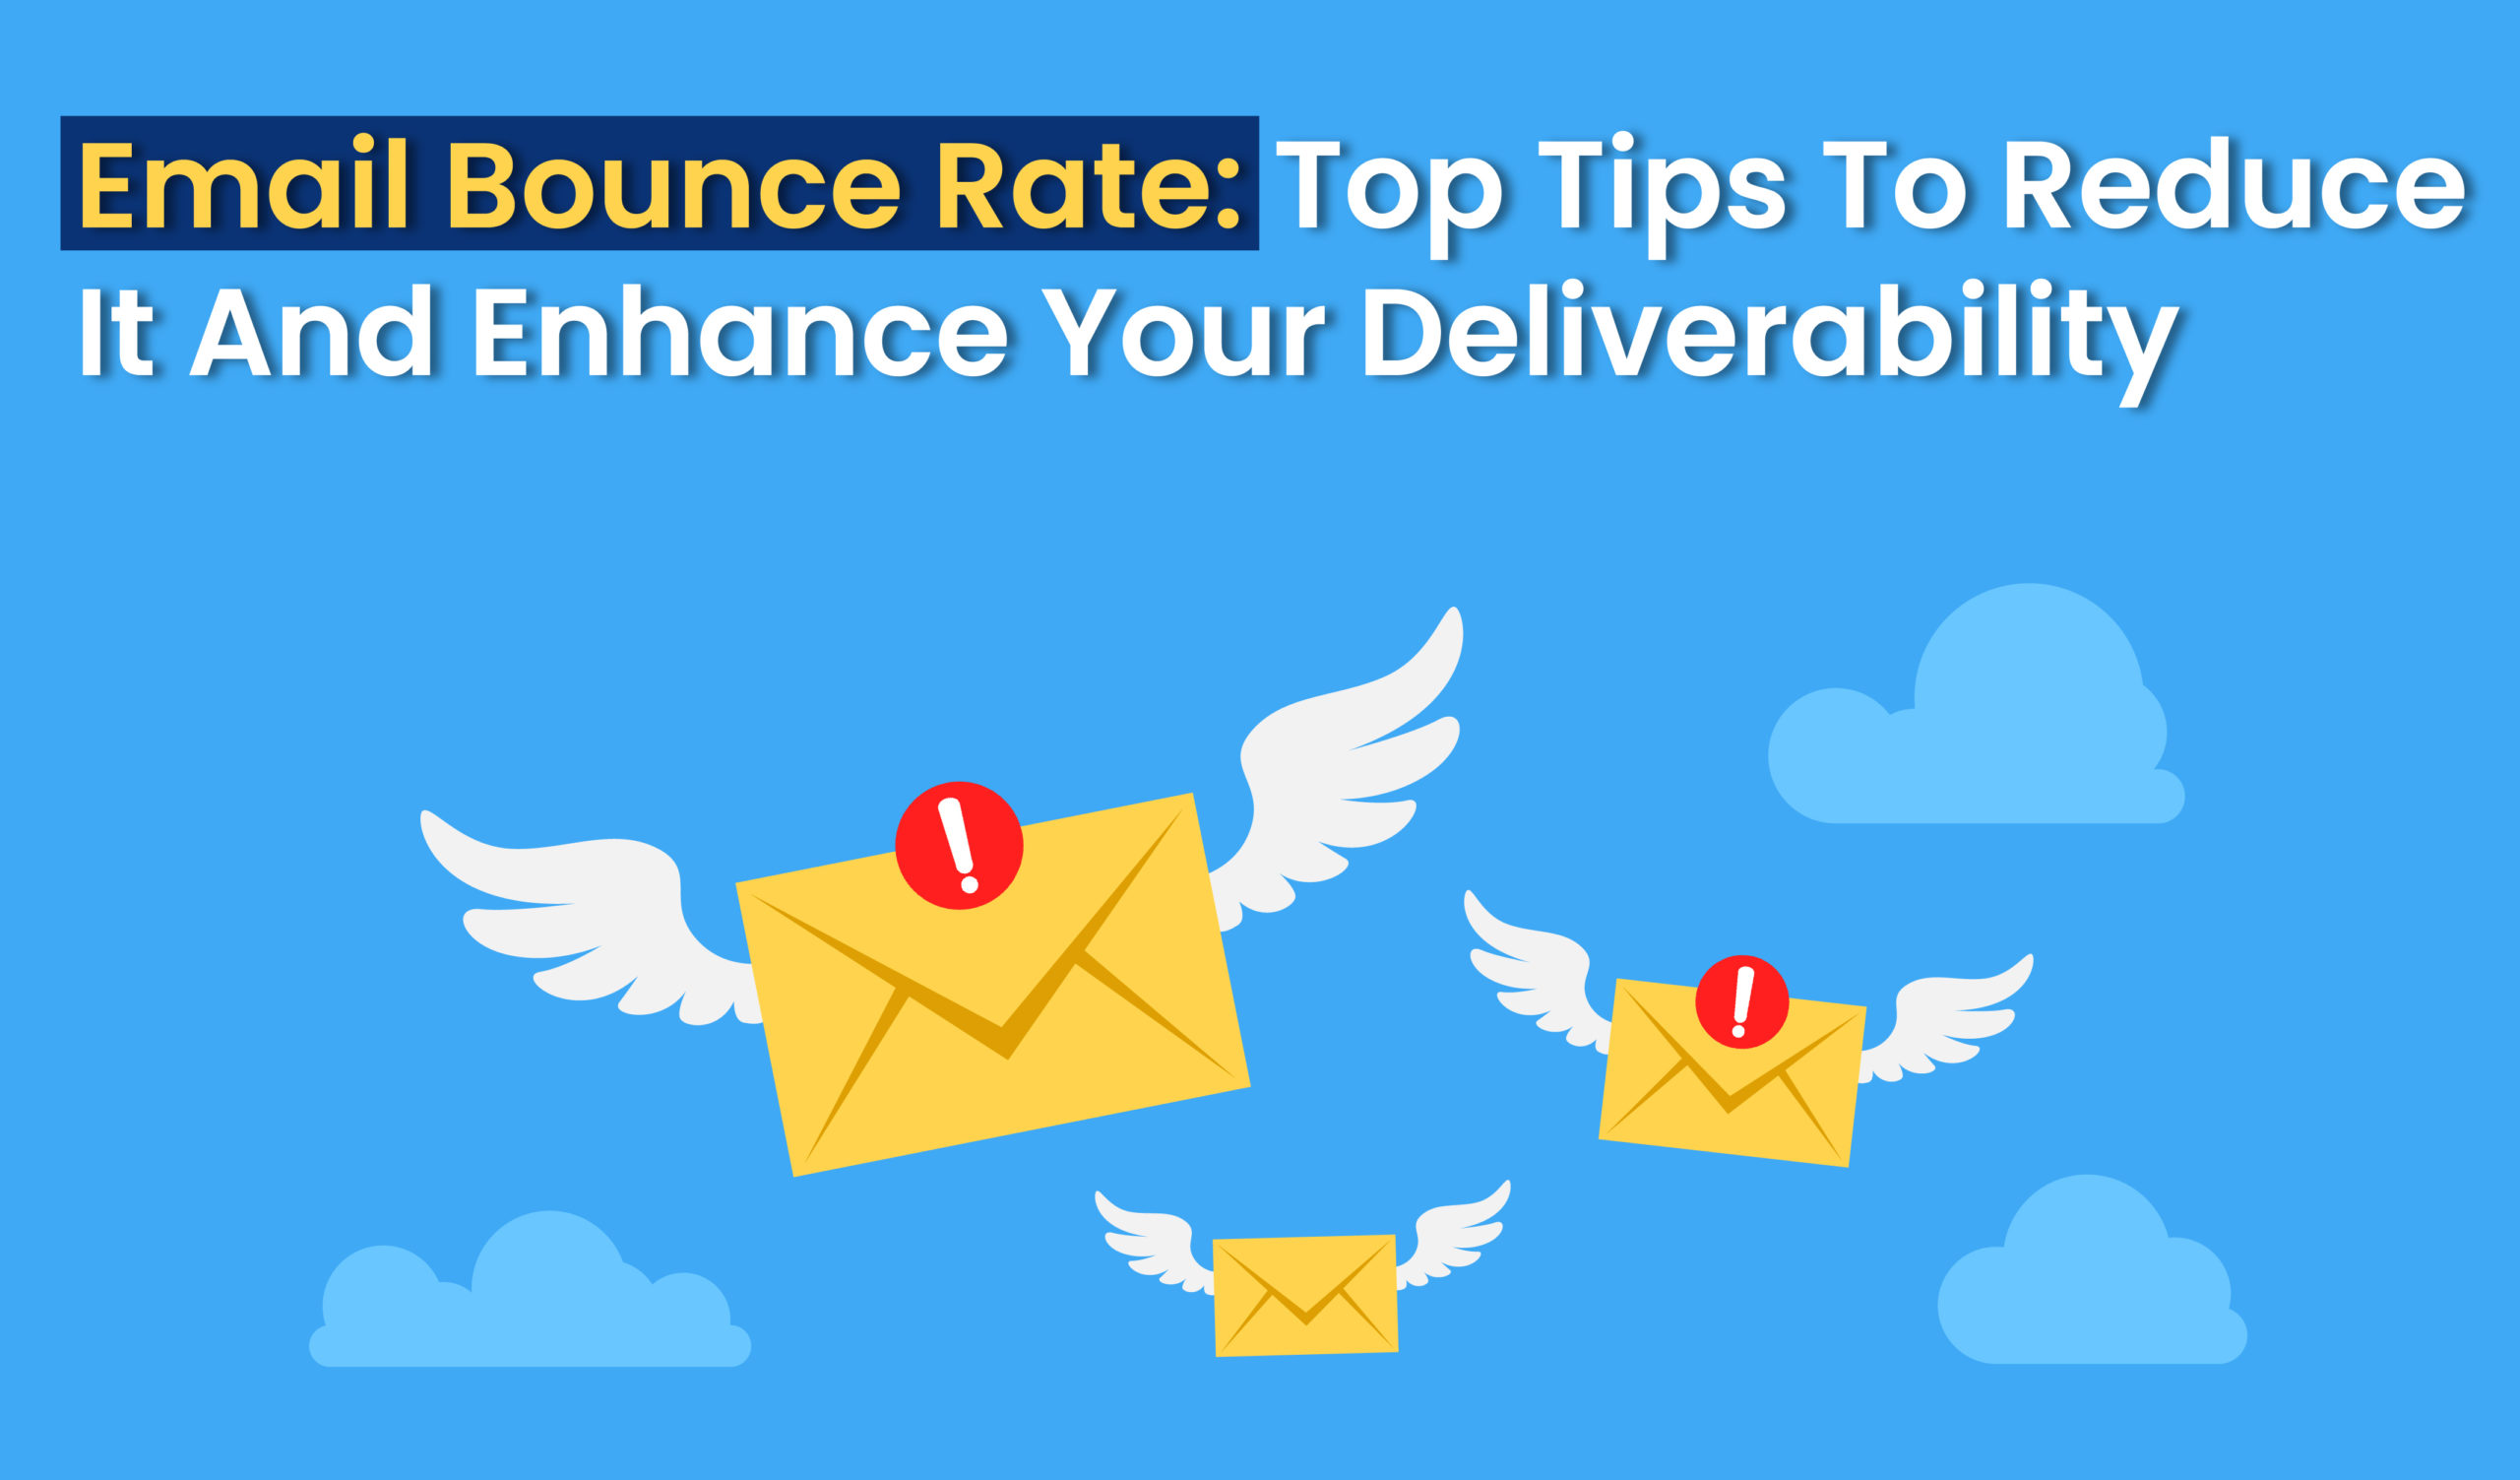 Email bounce rate: Top tips to reduce it and enhance your deliverability